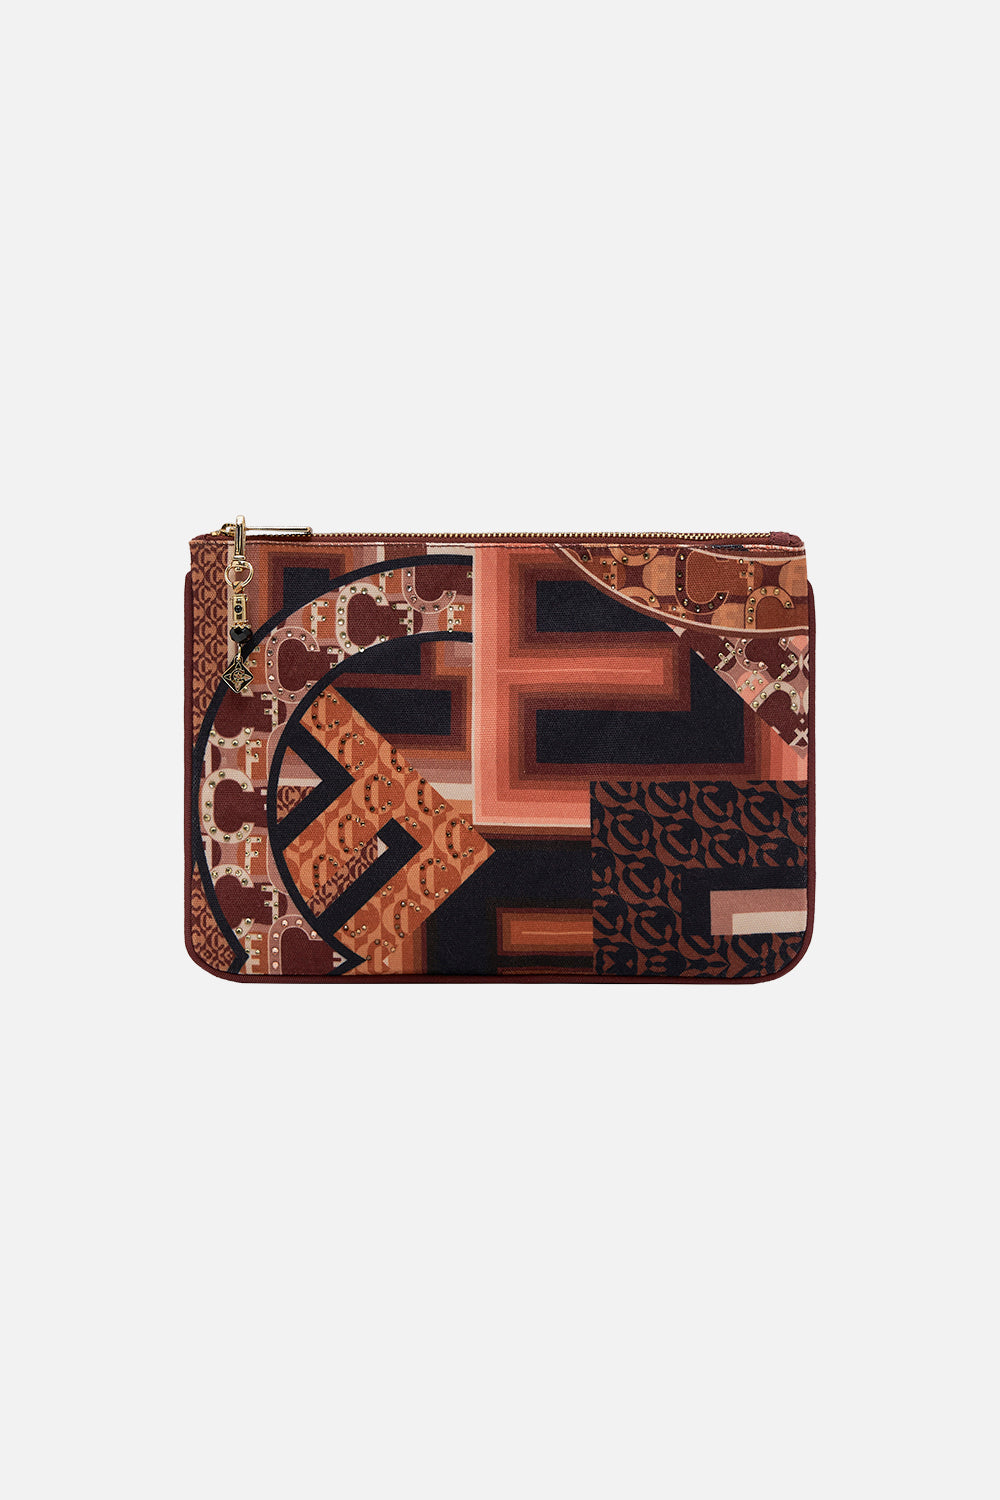 Product view of CAMILLA clutch bag In Feeling Fresco print